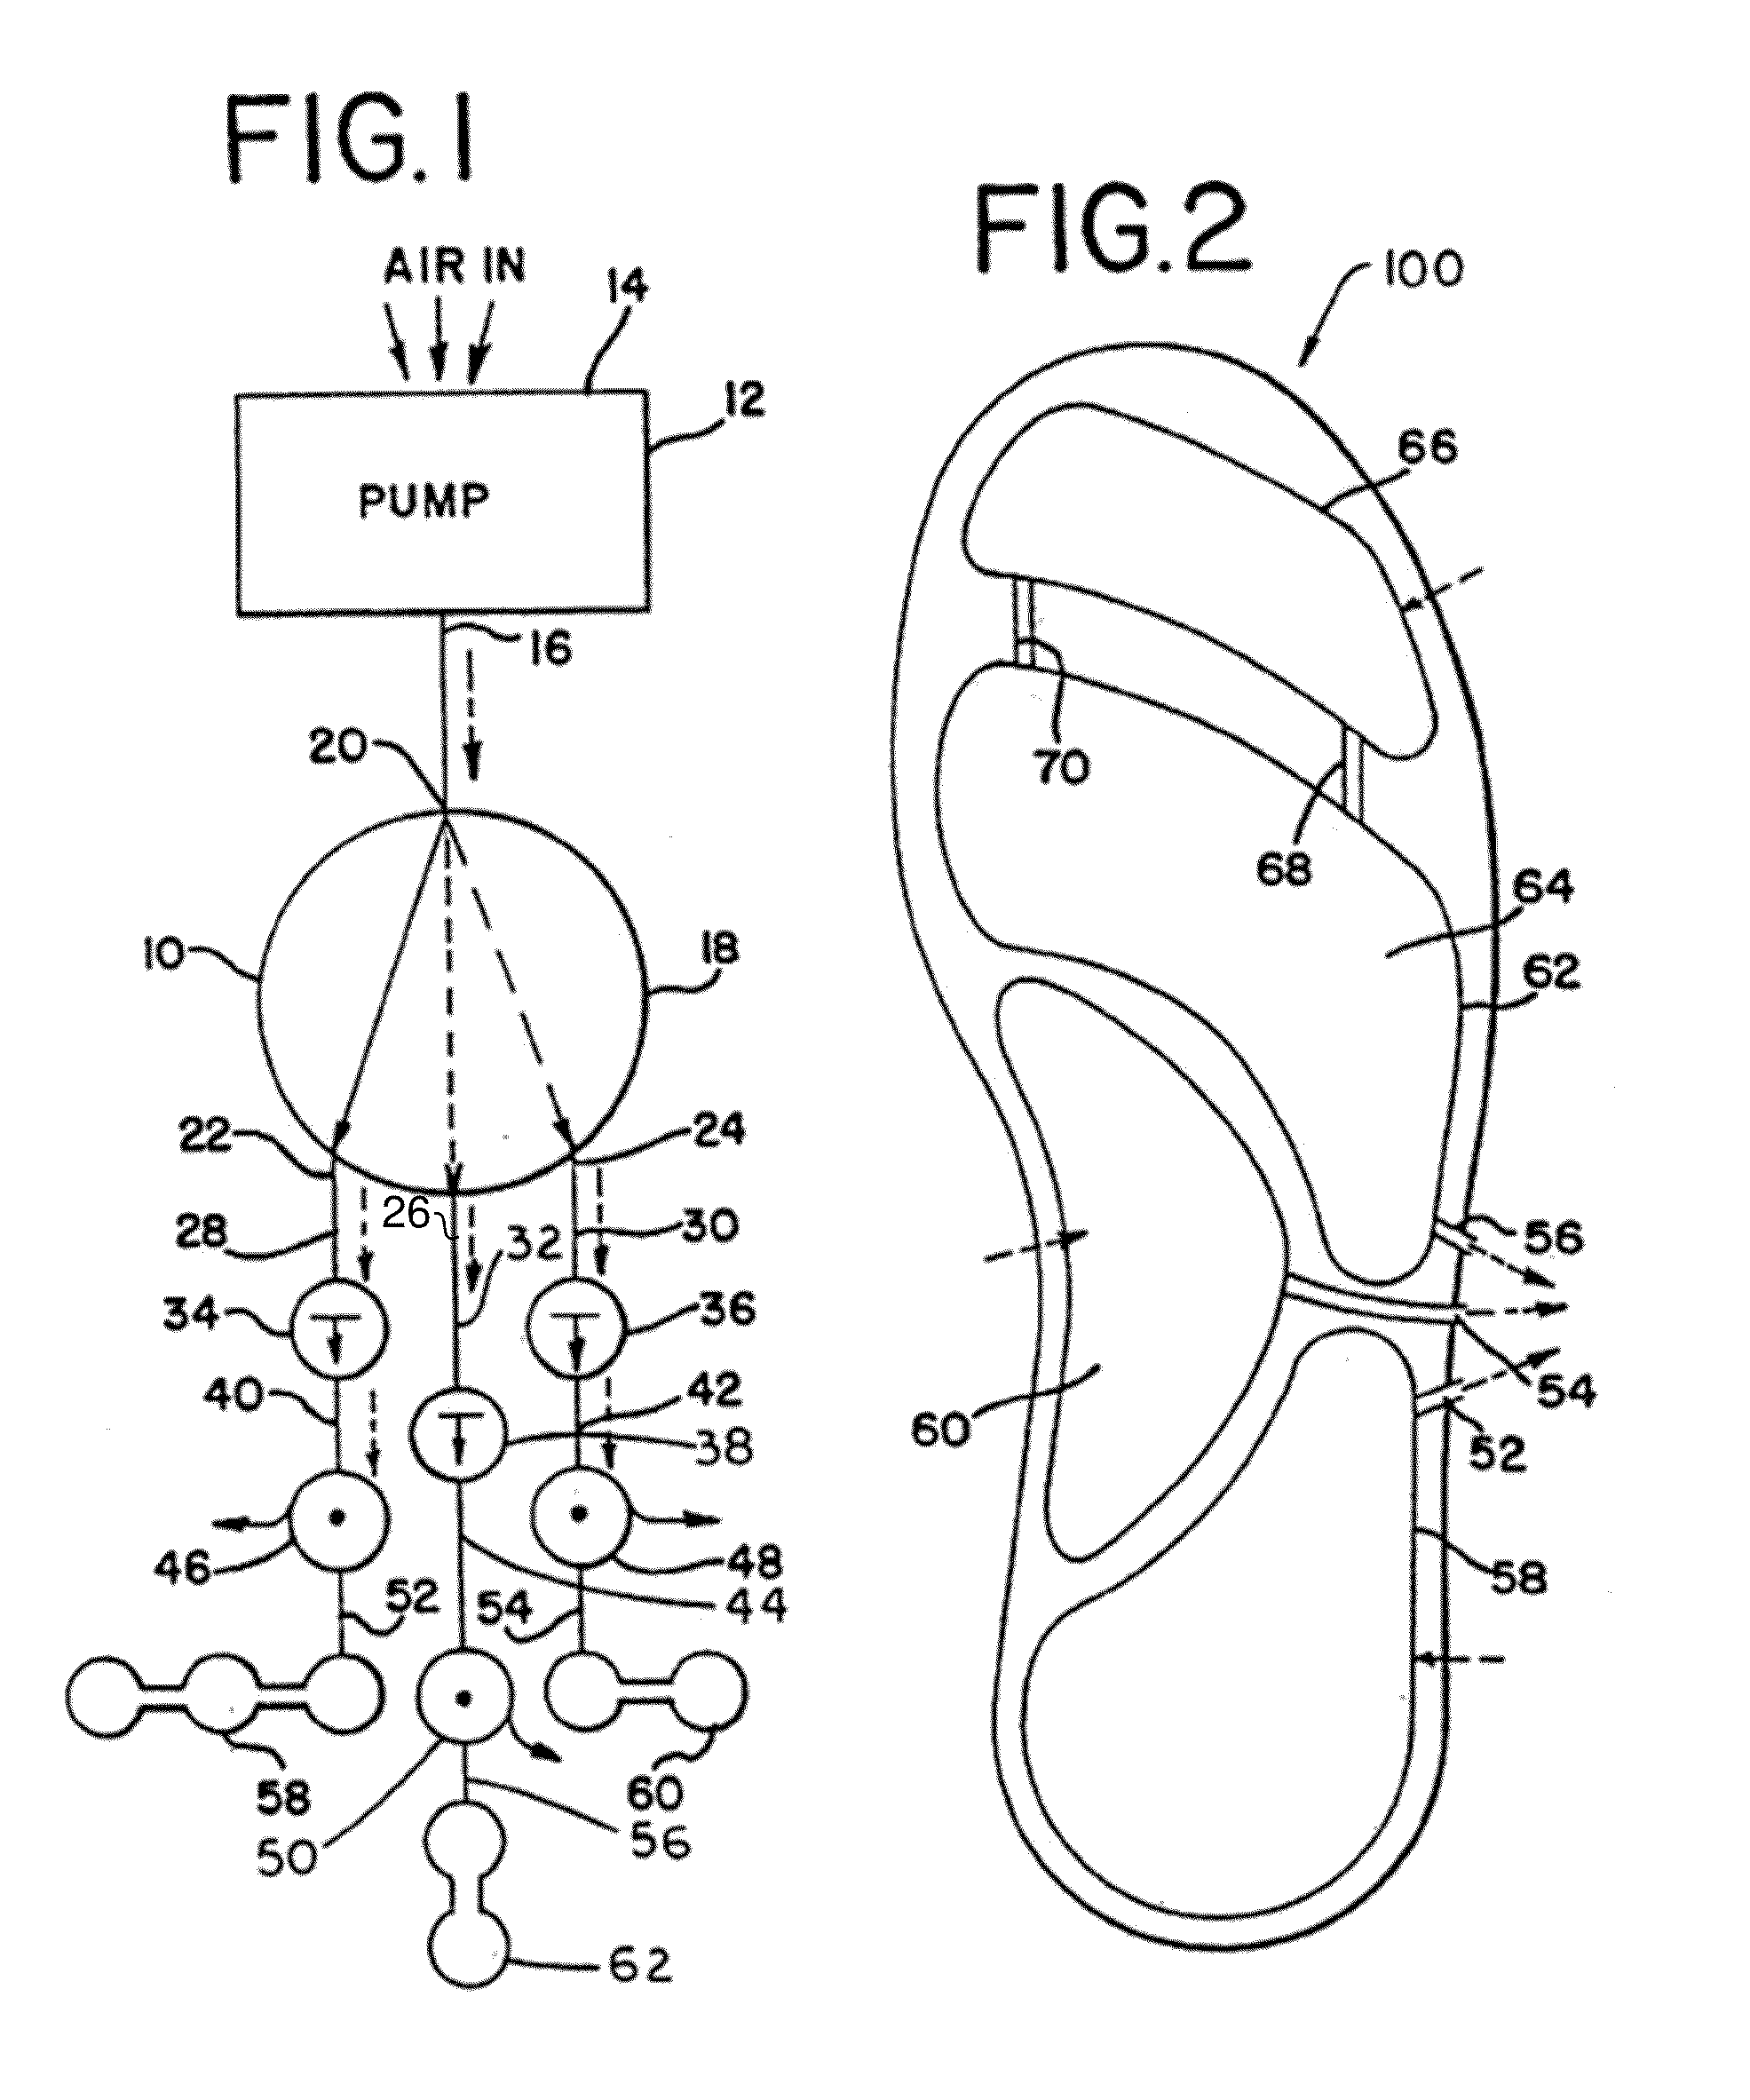 Pneumatically inflatable air bladder devices contained entirely within shoe sole or configured as shoe inserts